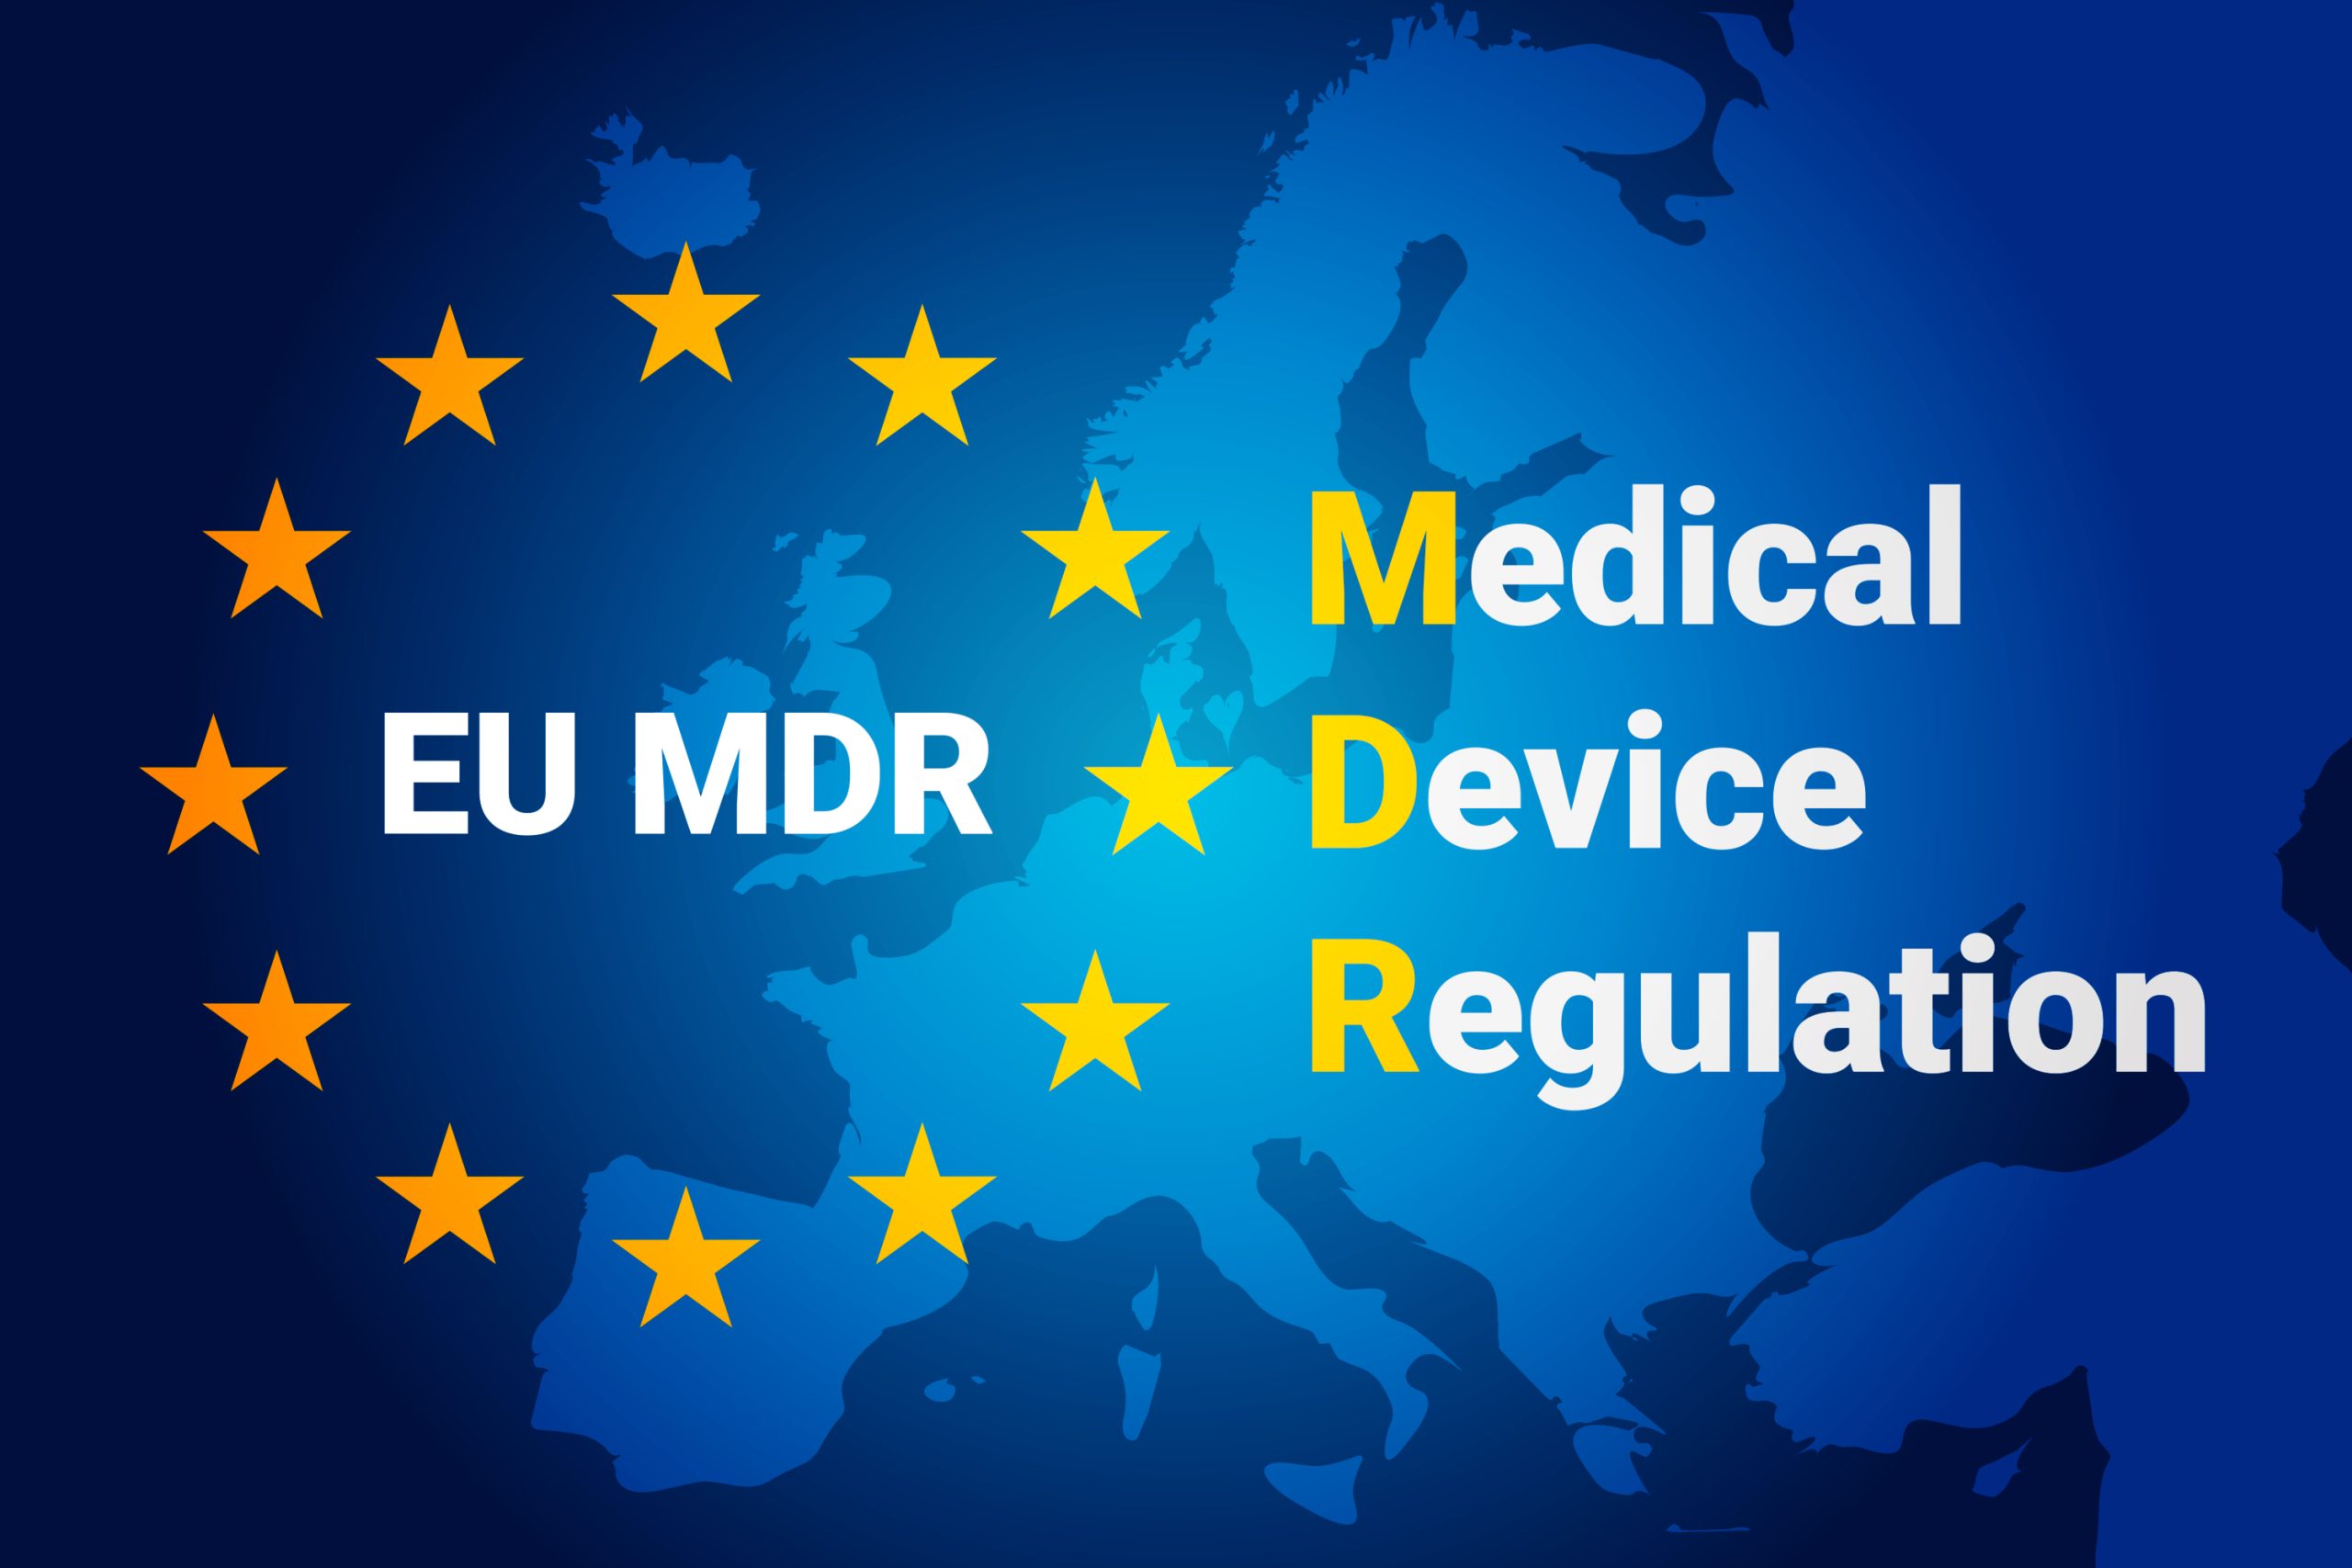 EU Commission Language Requirements for Medical Devices in Europe